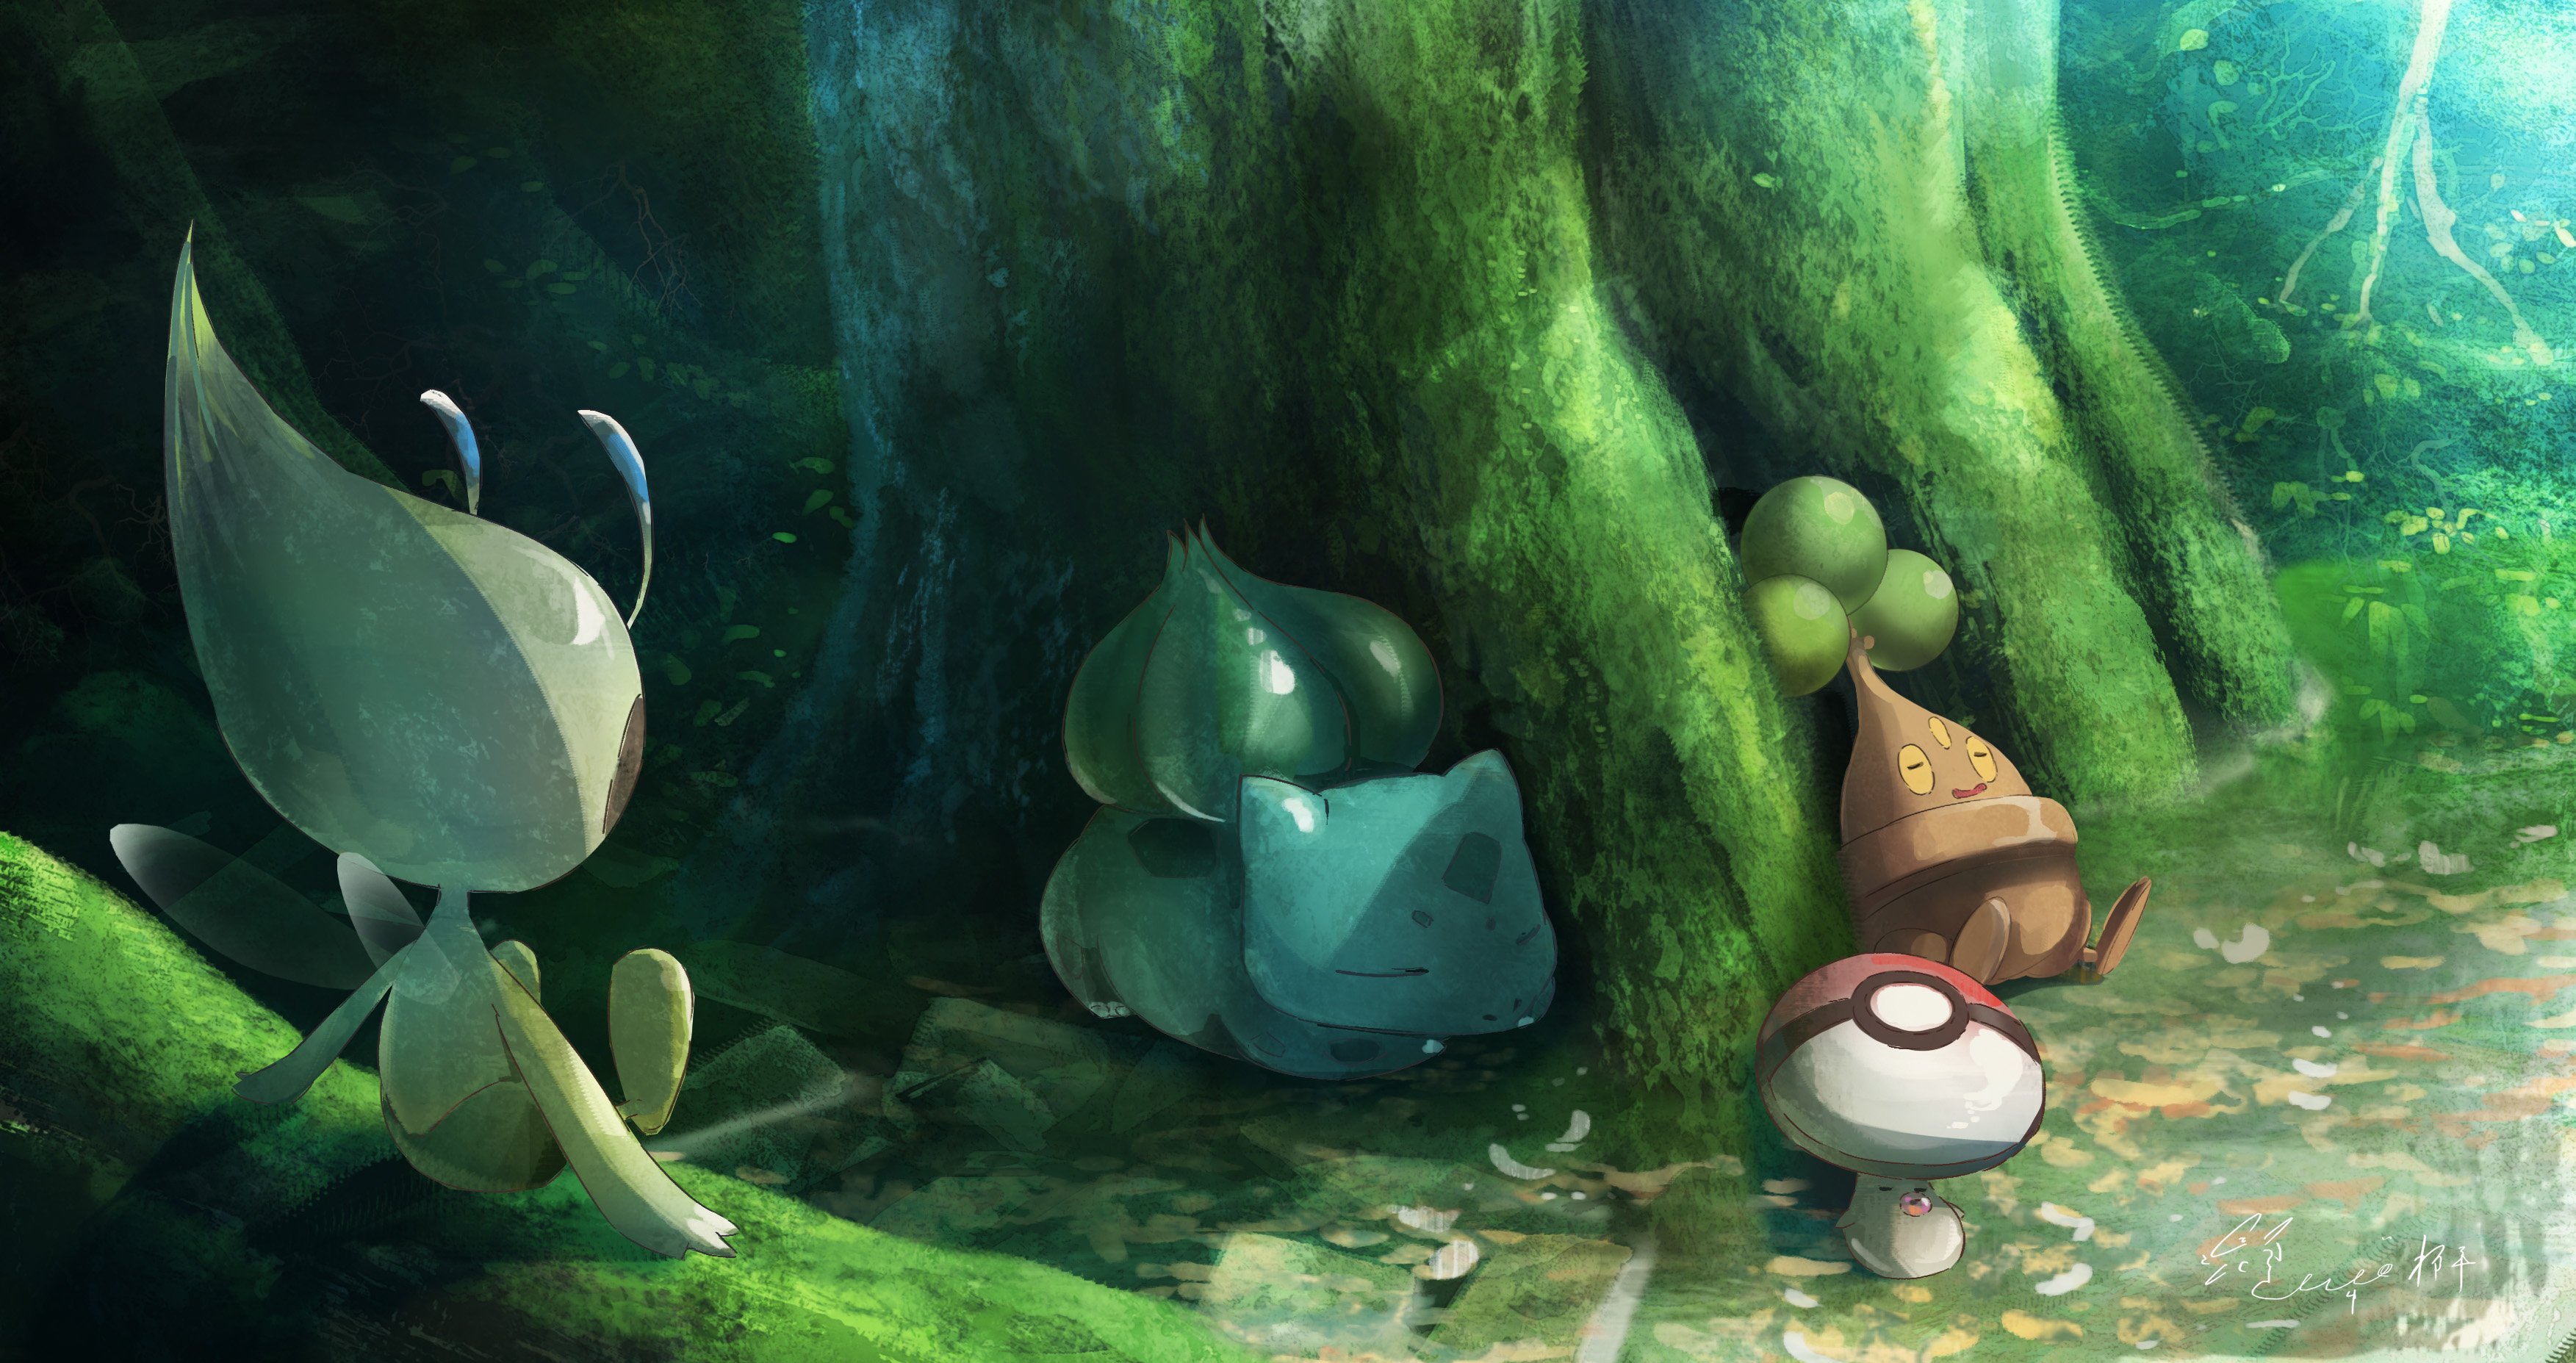 Pokemon Napping in the Forest by まんぷくア HD Wallpaper